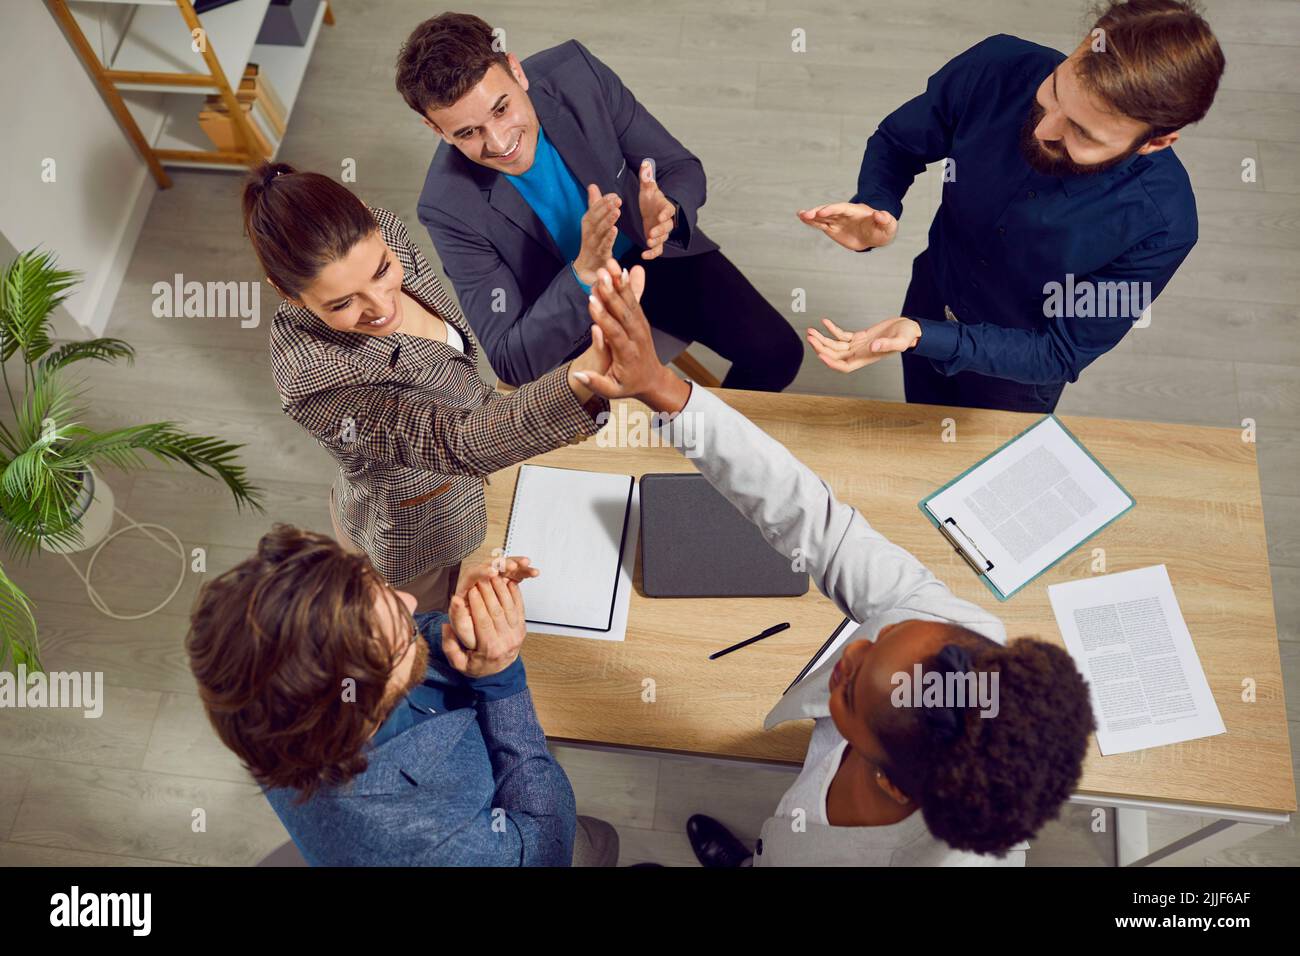 Diverse team of people close successful business deal and give each other high five Stock Photo